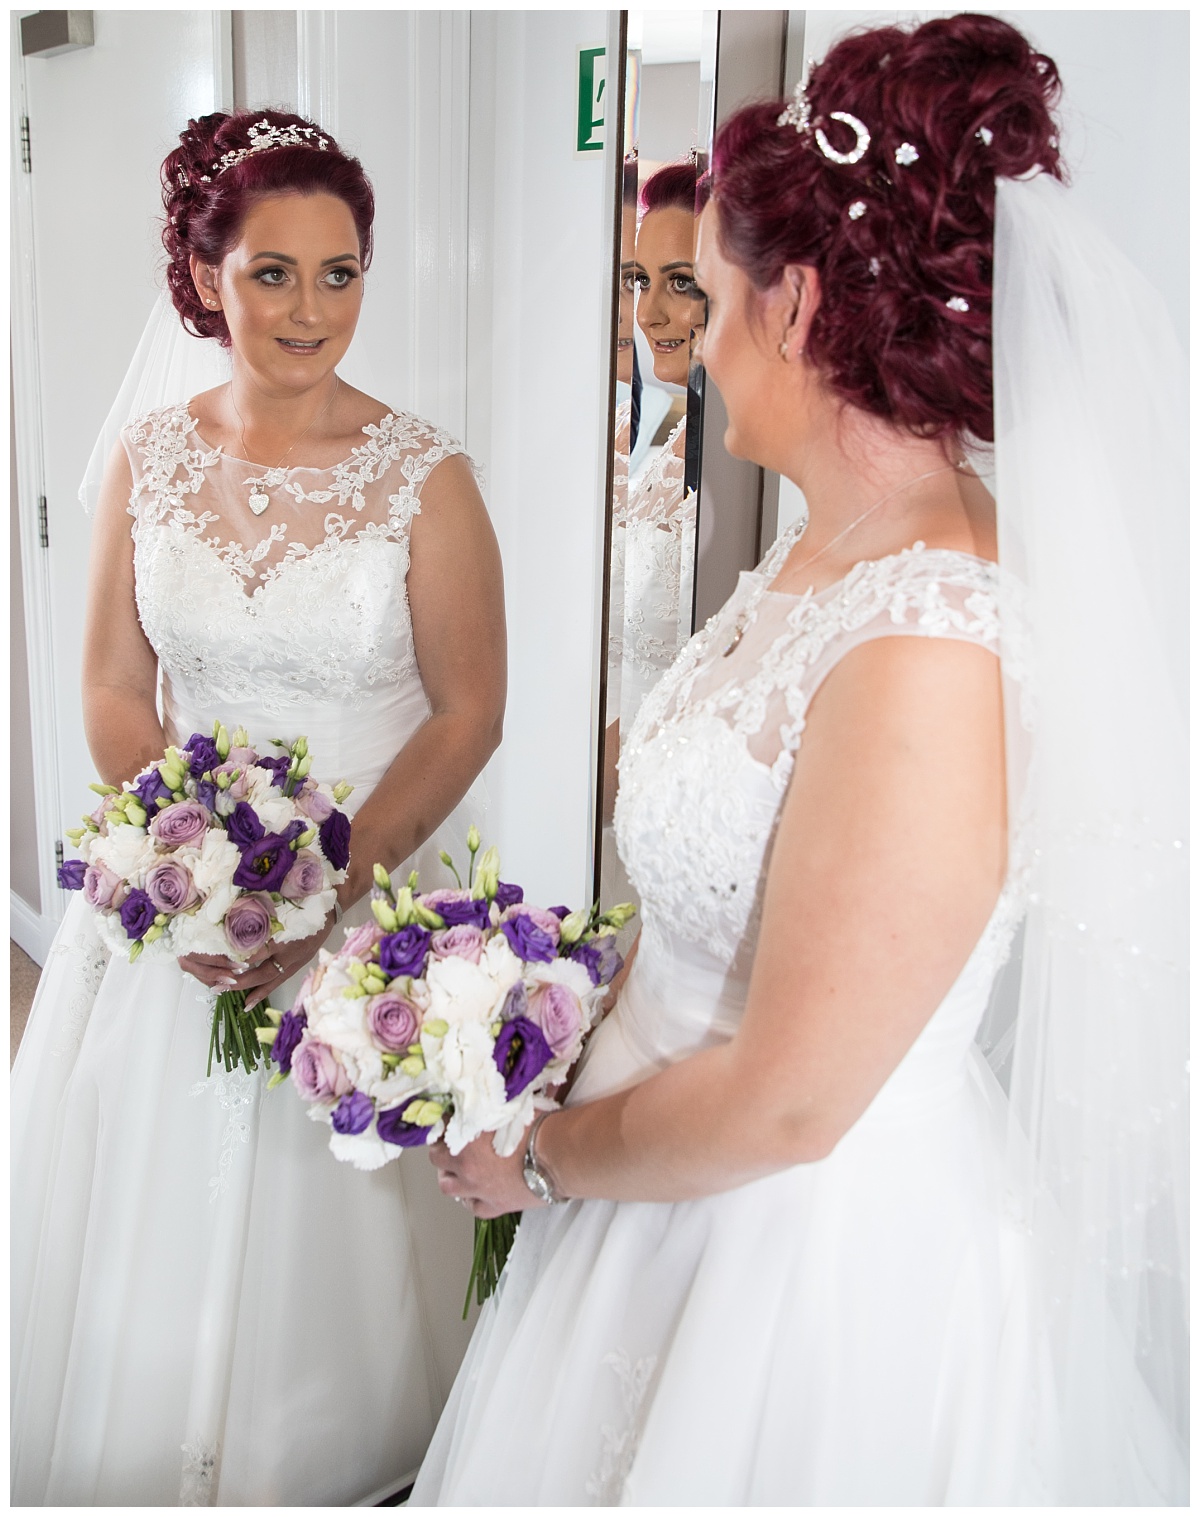 Wedding Photography Manchester - Leigh and Dave's Cheadle House Wedding Day 25